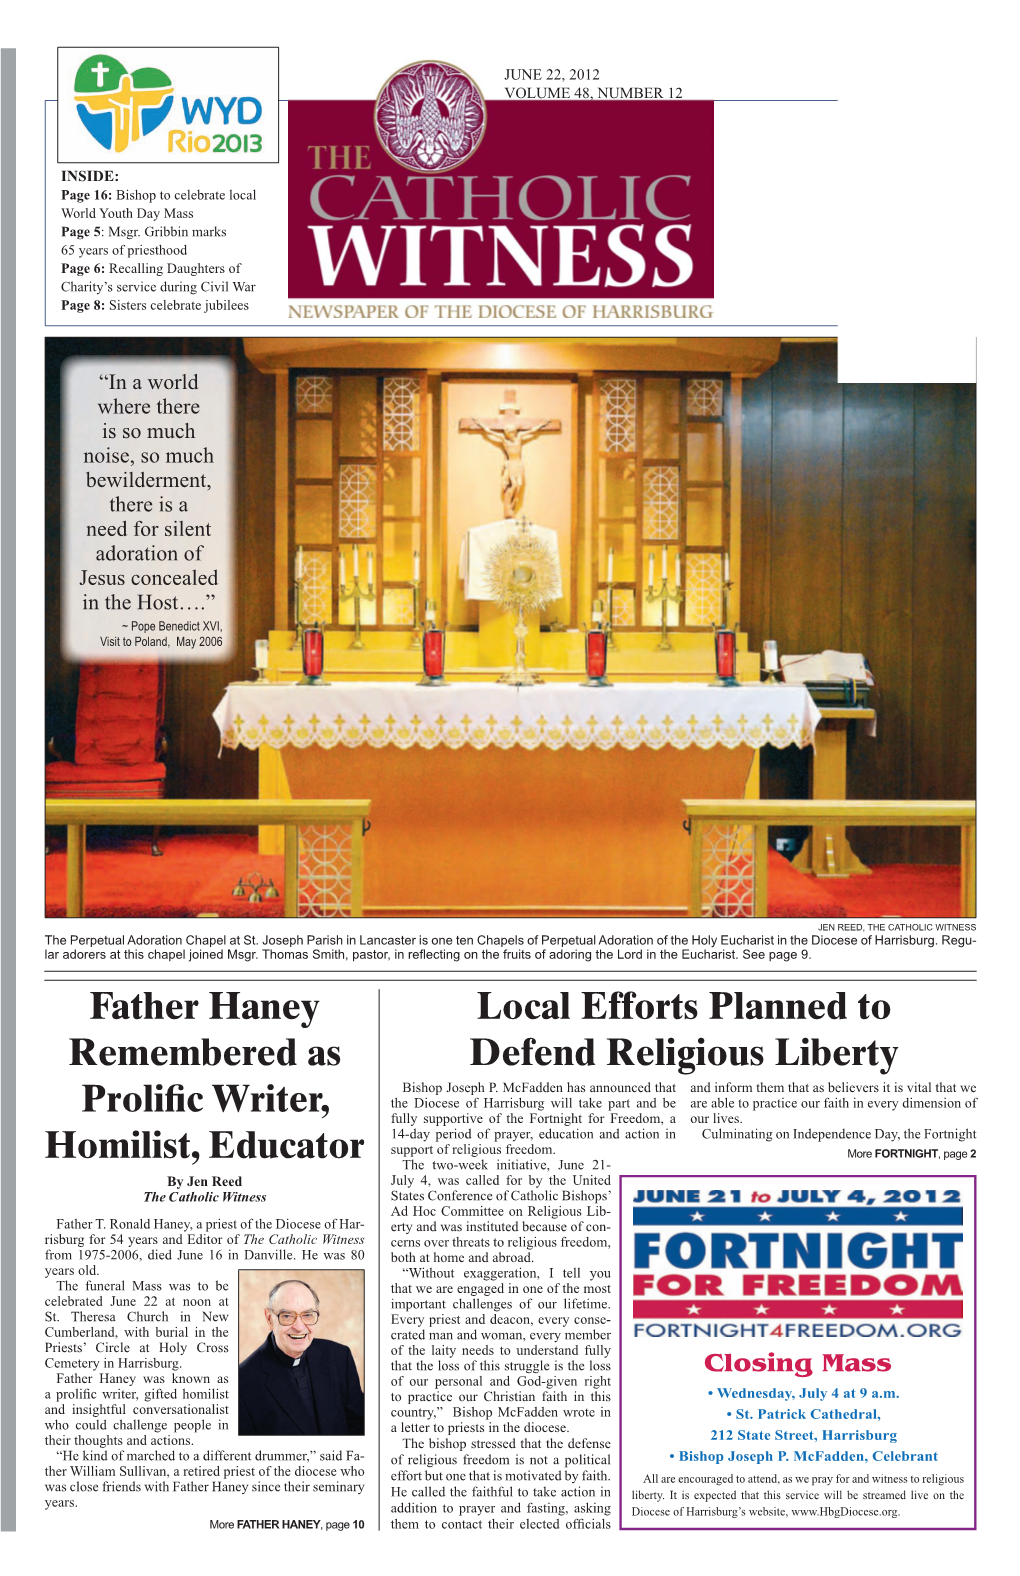 Local Efforts Planned to Defend Religious Liberty Father Haney